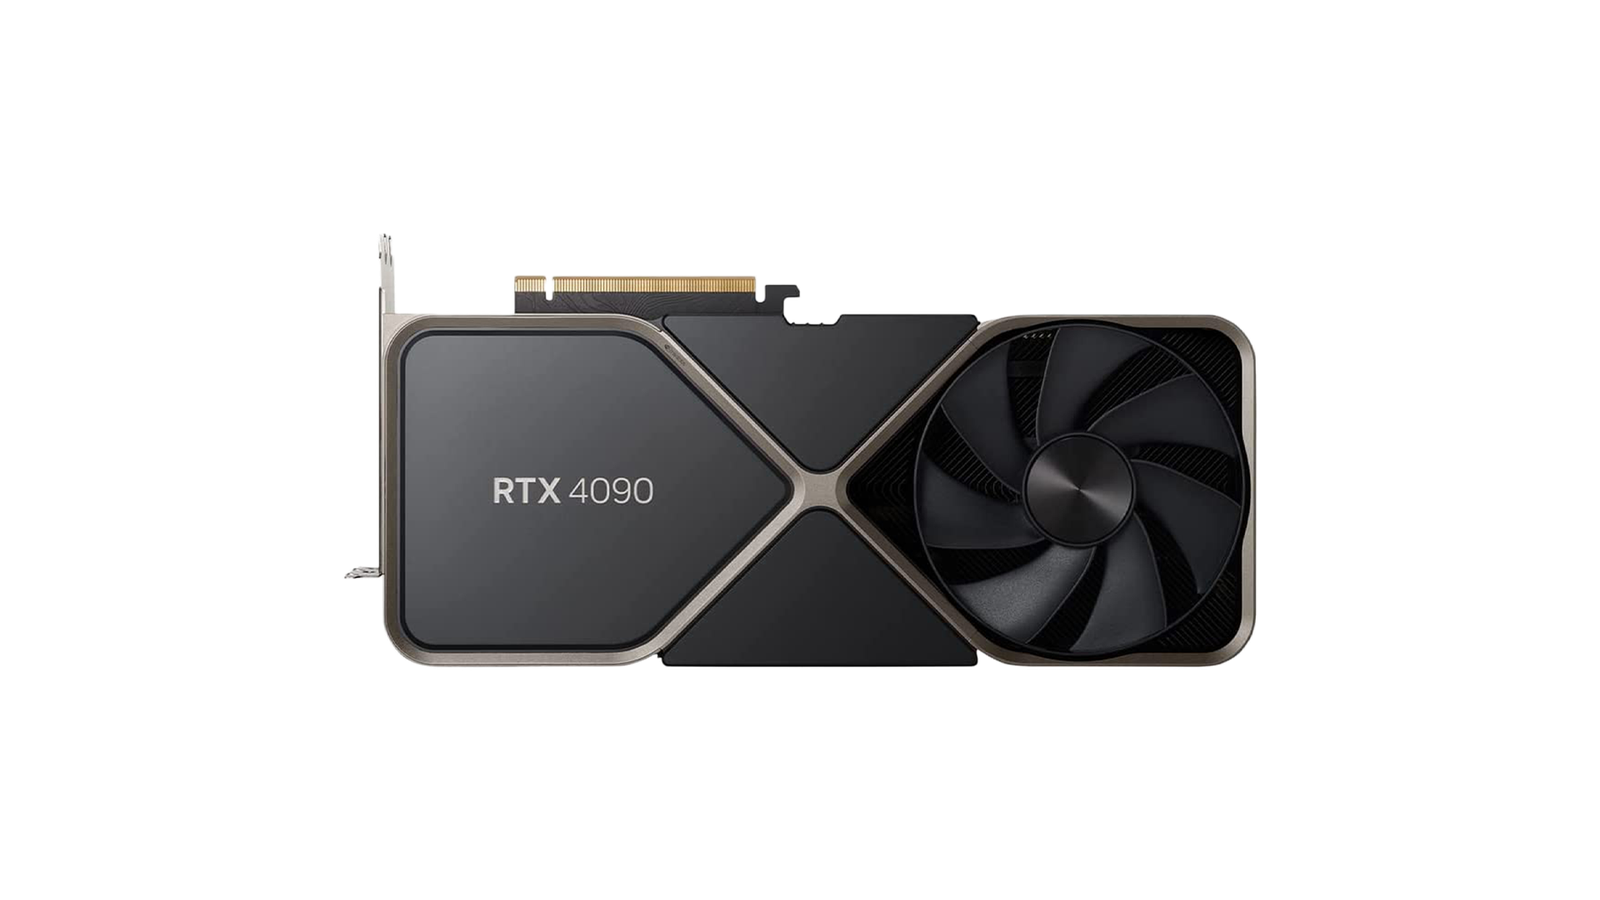 Nvidia GeForce RTX 4090 - The ultimate graphics card for video editing